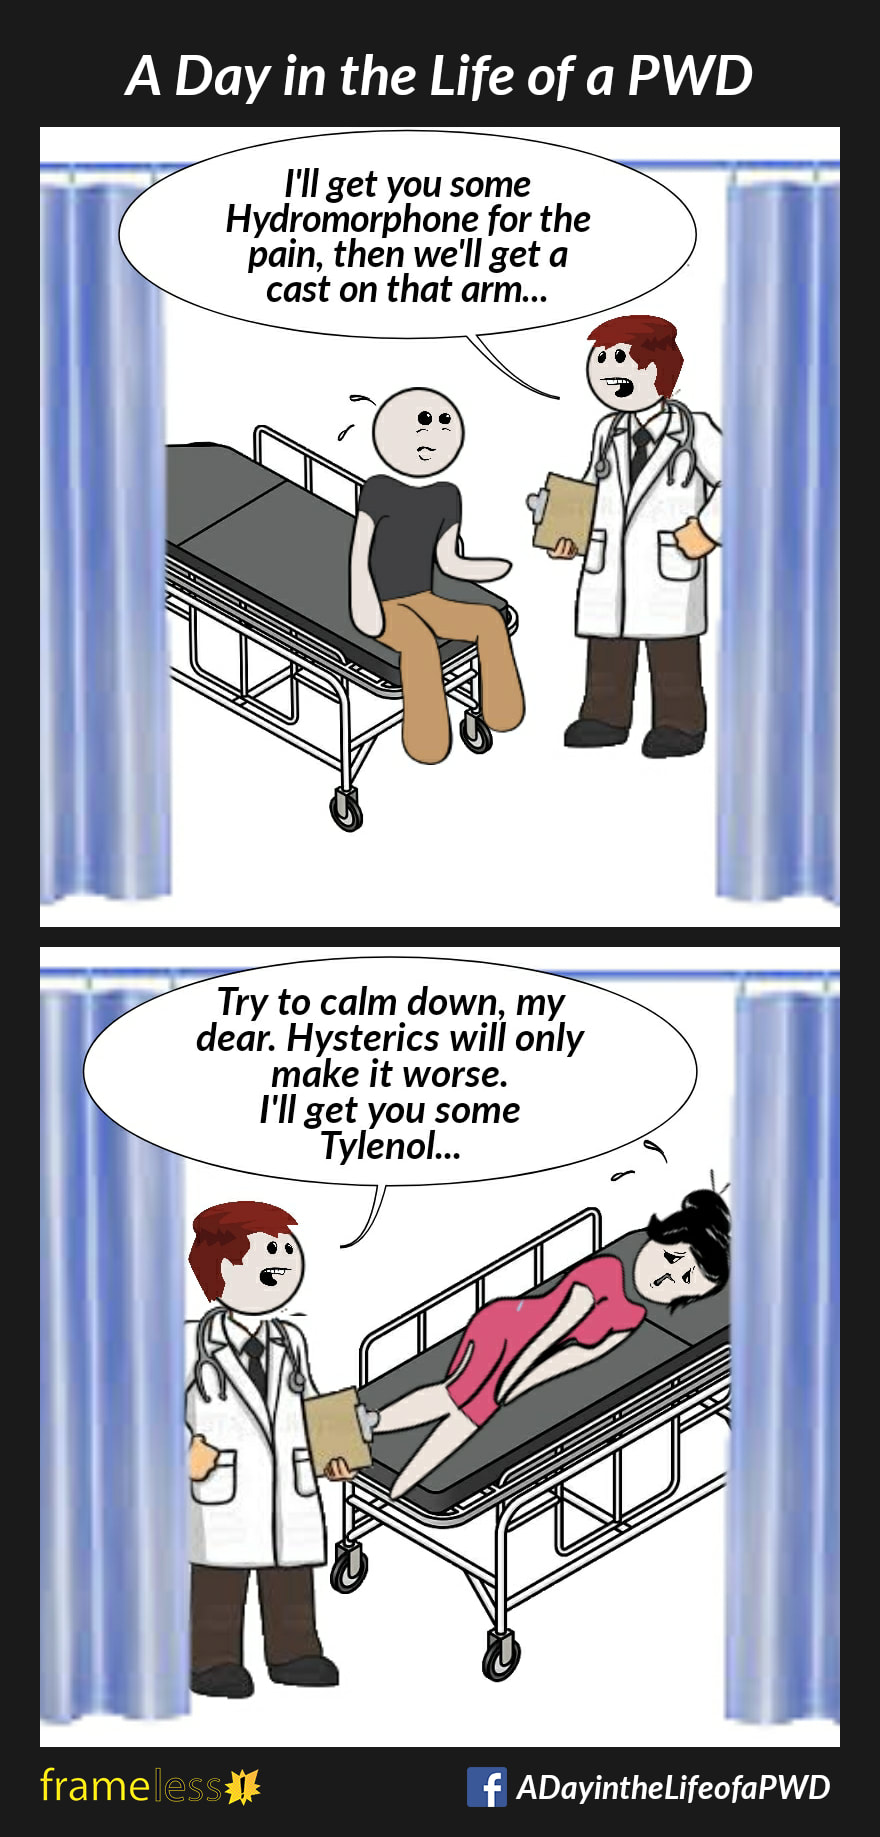 COMIC STRIP 
A Day in the Life of a PWD (Person With a Disability) 

Frame 1:
A man in pain is sitting on a hospital gurney in a curtained room talking to a doctor.
DOCTOR: I'll get you some Hydromorphone for the pain, then we'll get a cast on that arm...

Frame 2:
In the next room, a woman laying on a gurney in pain talks to the same doctor.
DOCTOR: Try to calm down, my dear. Hysterics will only make it worse. I'll get you some Tylenol...